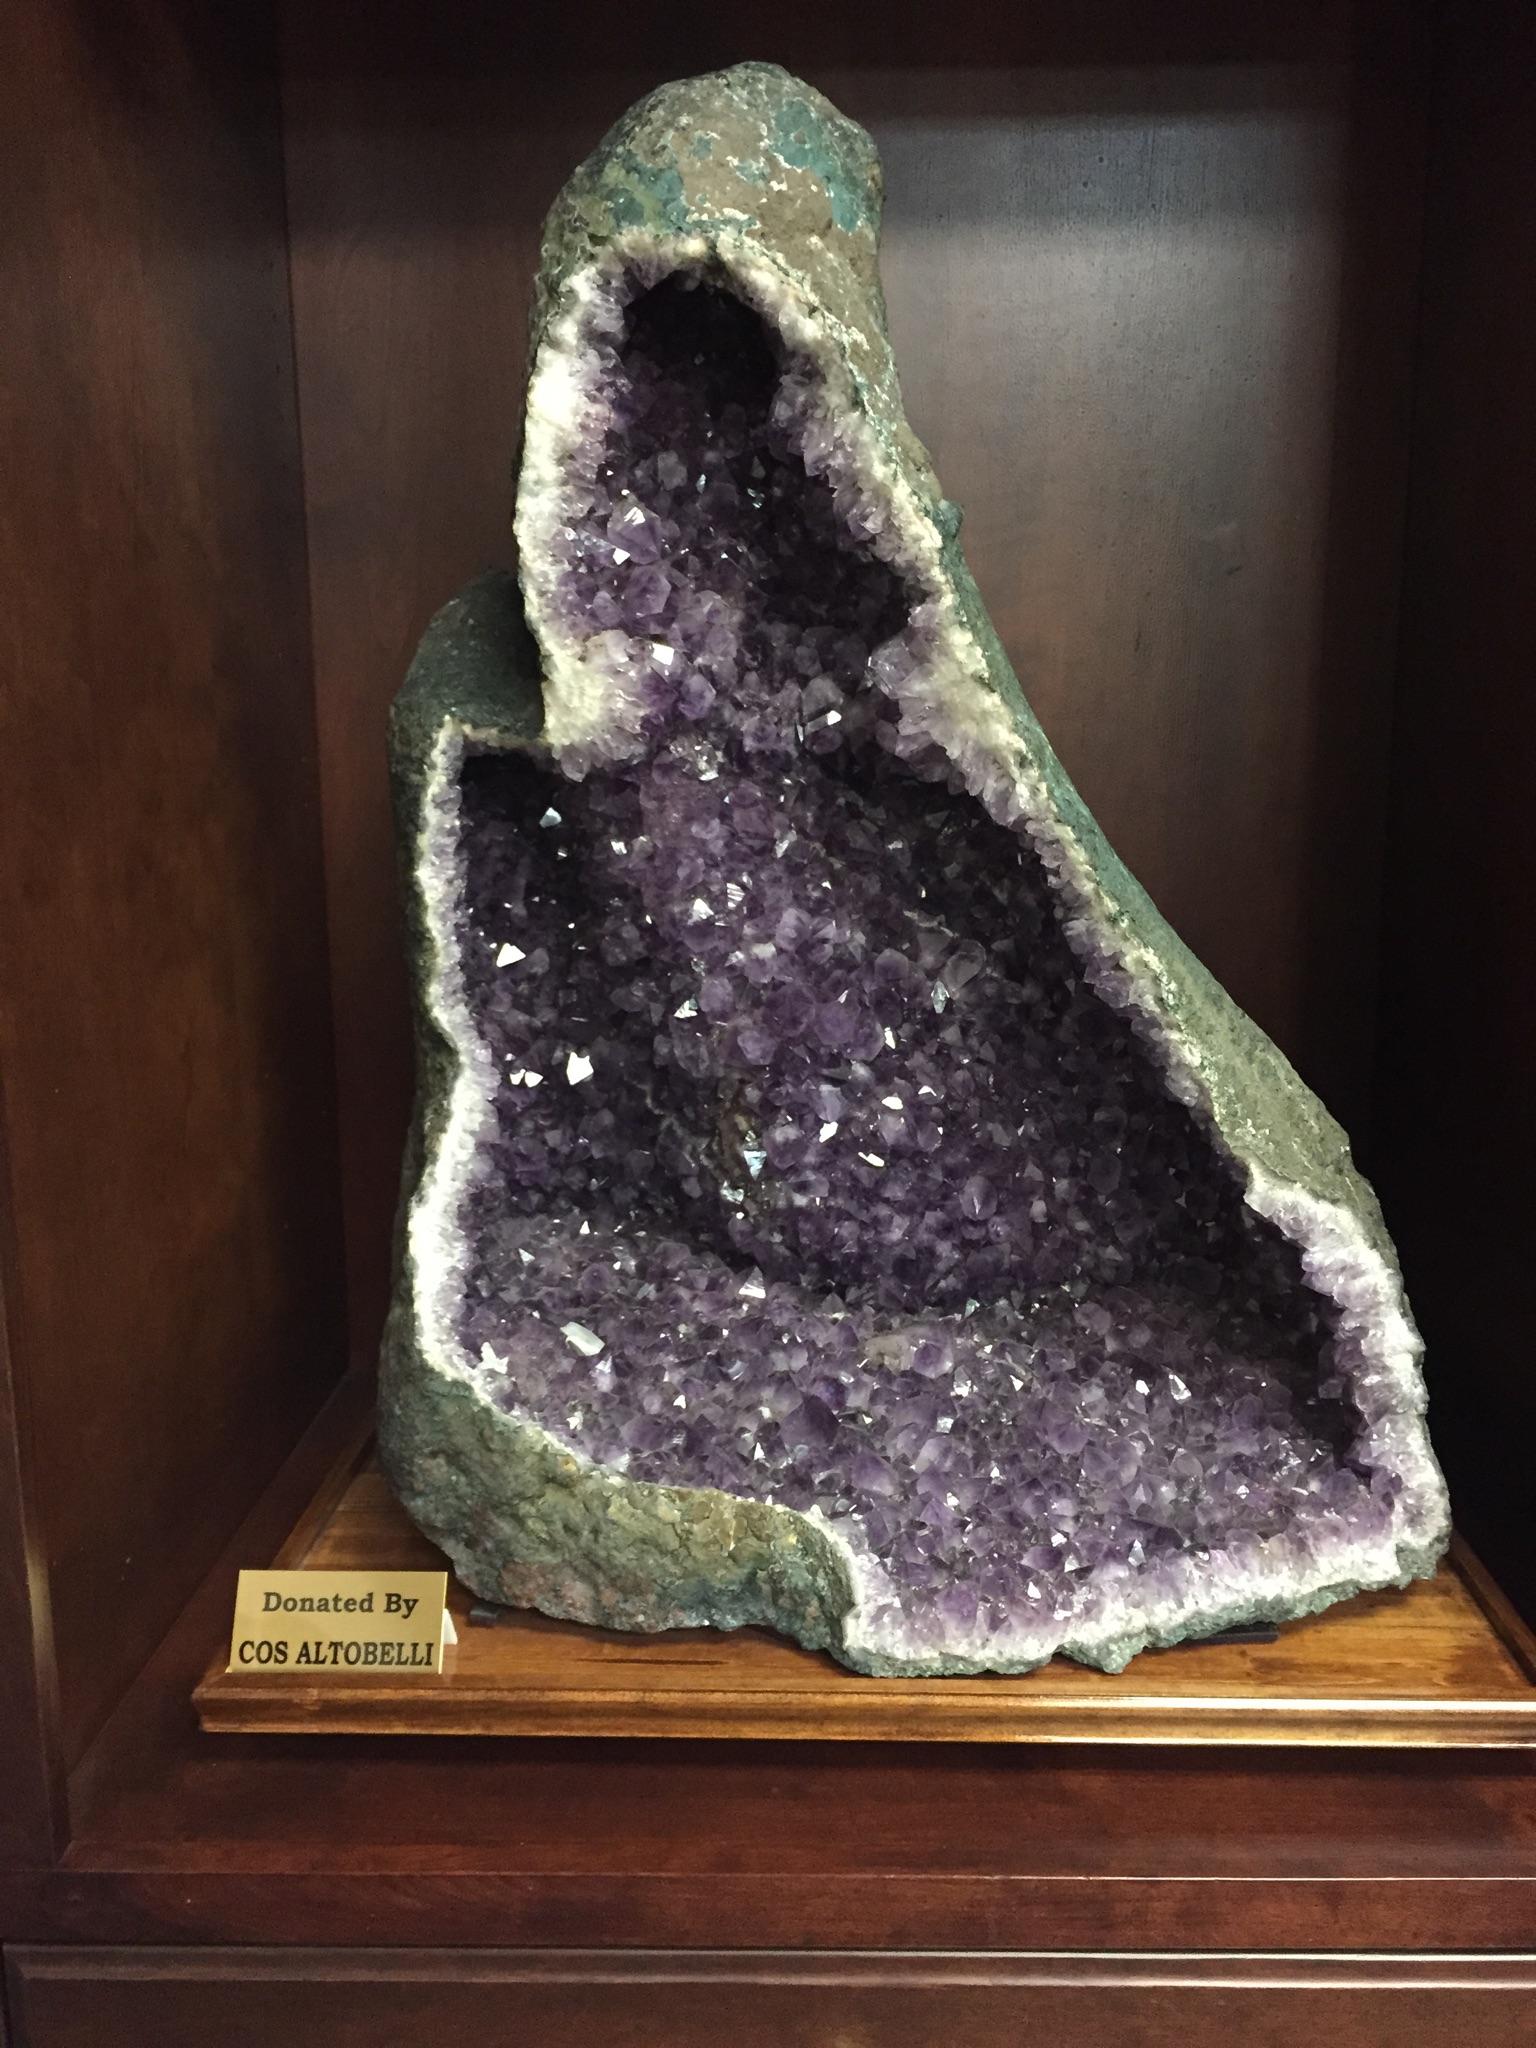 Raw amethyst at the AGS headquarters